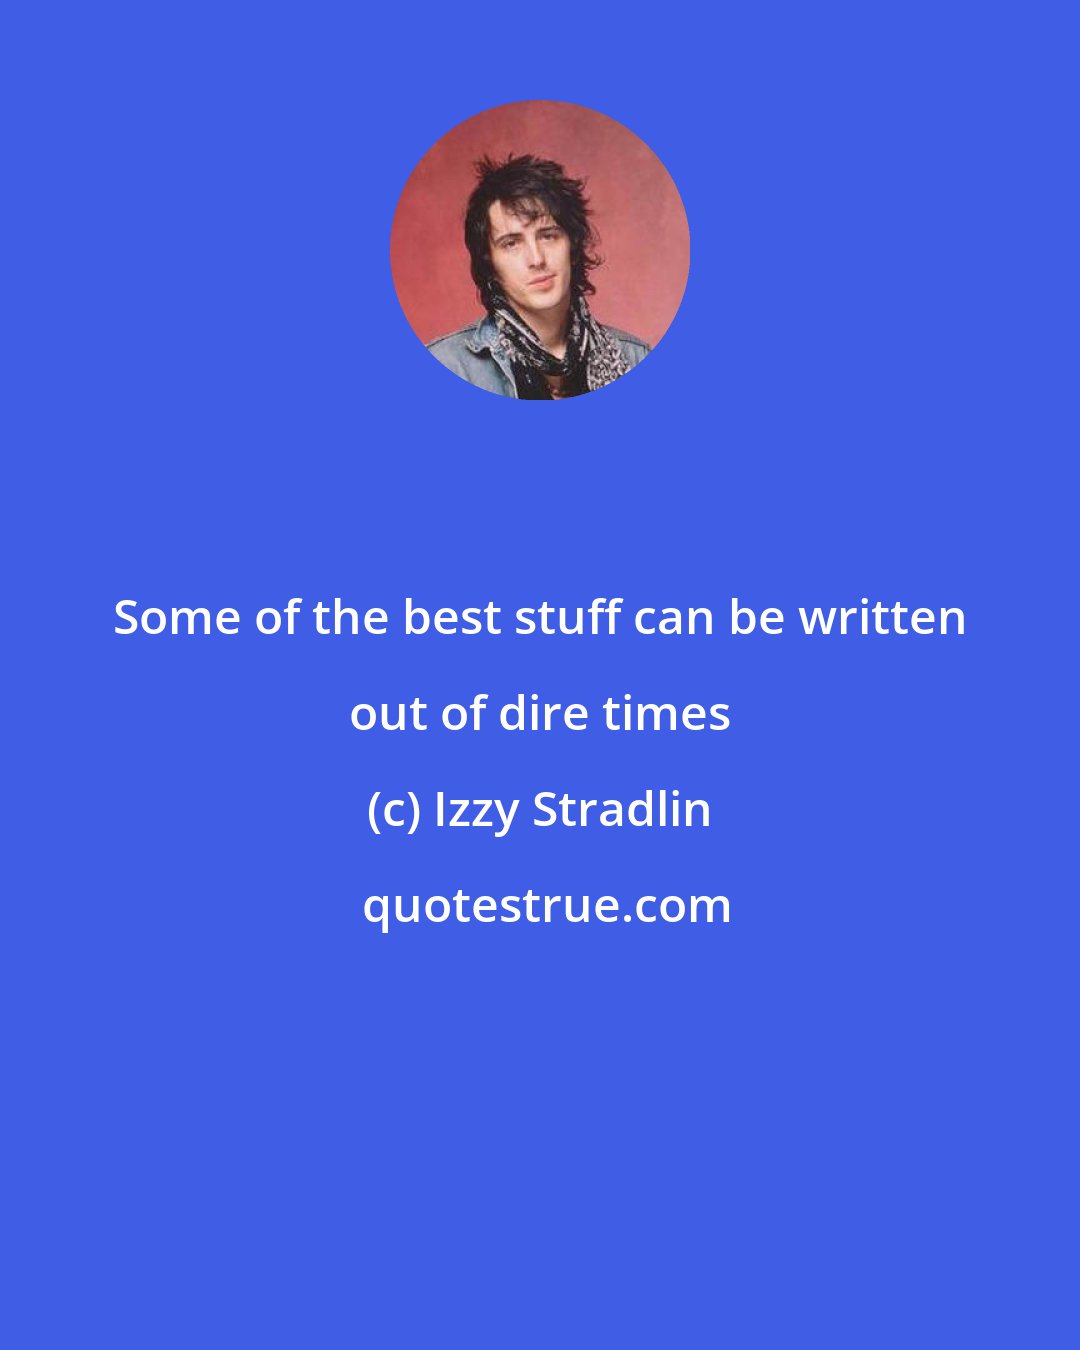 Izzy Stradlin: Some of the best stuff can be written out of dire times